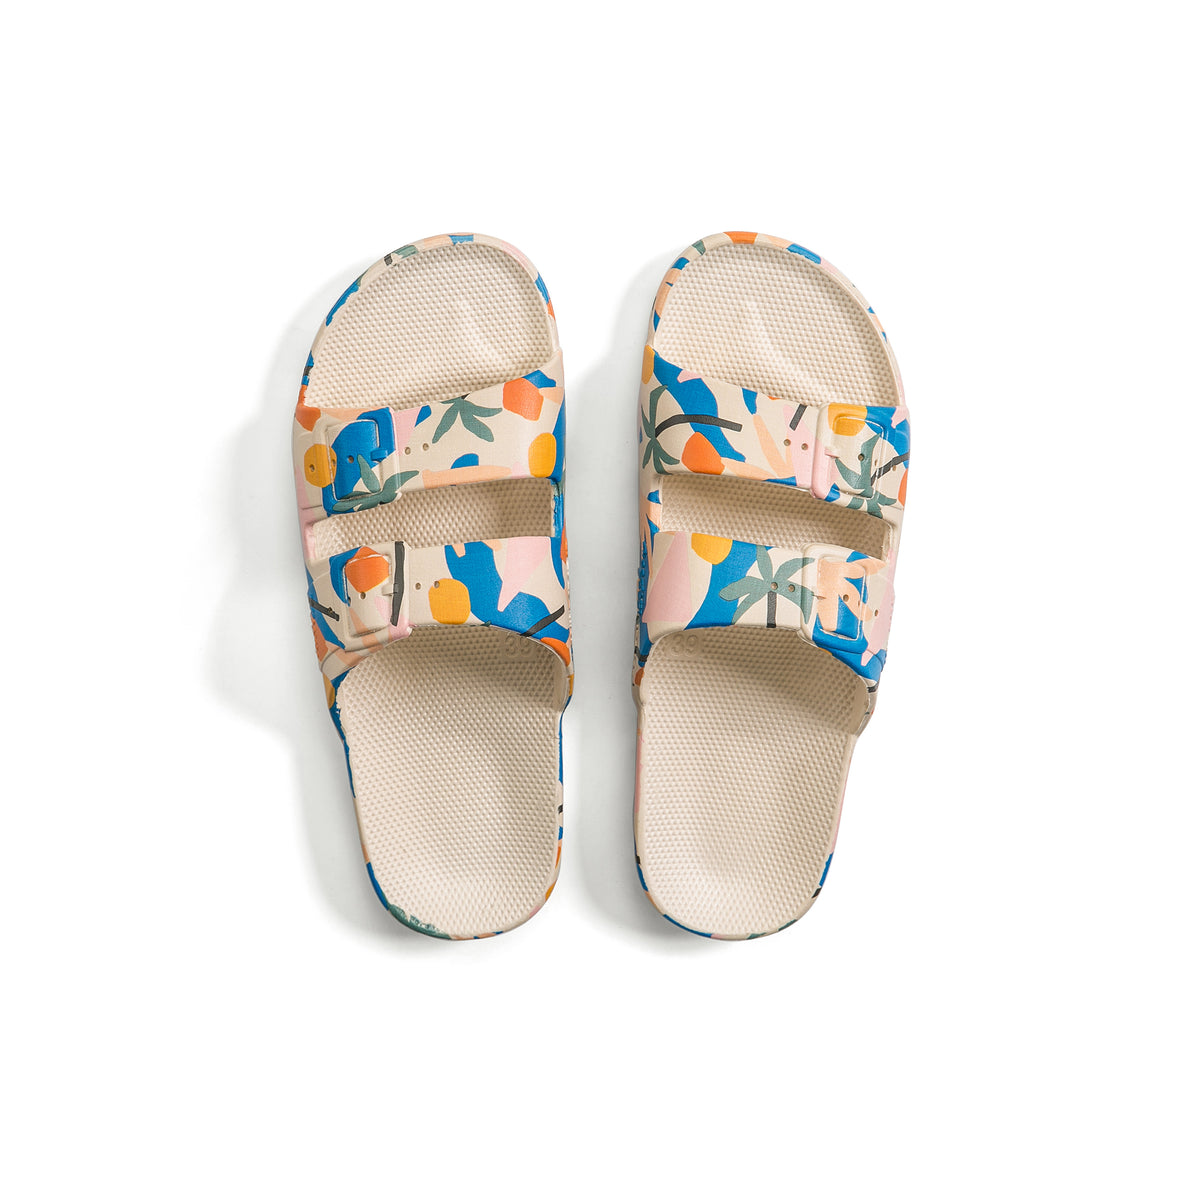 Parallel Culture Shoes and Fashion Online SLIDES FREEDOM MOSES FREEDOM MOSES PRINTS